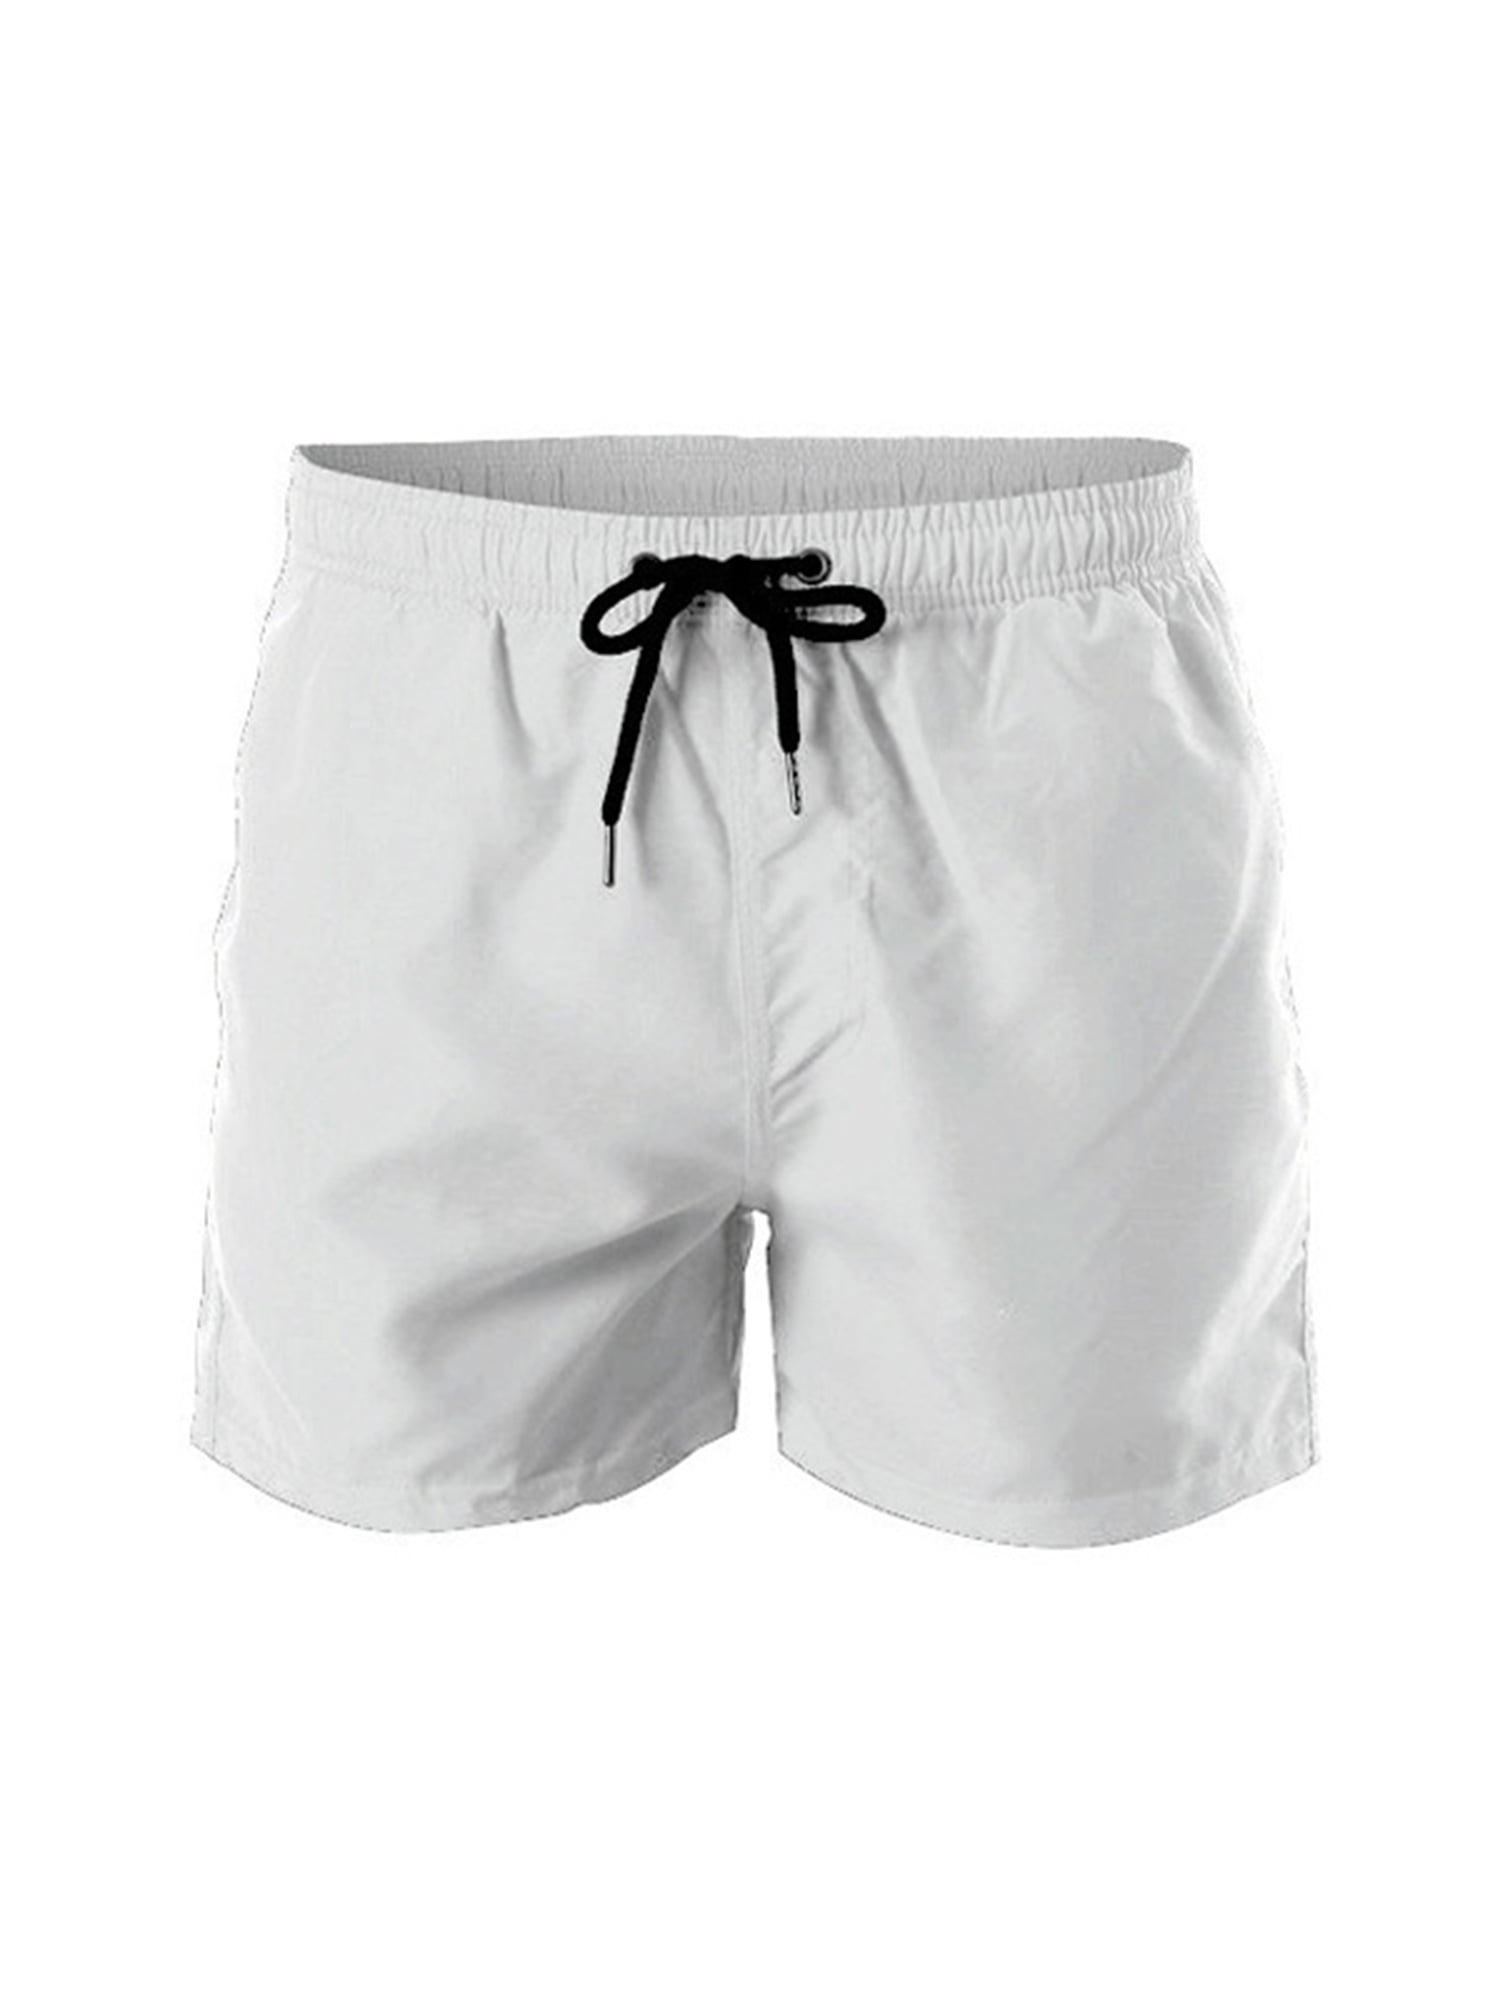 Men Quick-Dry Shorts Plus Size Beach Swim Trunks Breathable Boy Board Shorts with Pockets White 